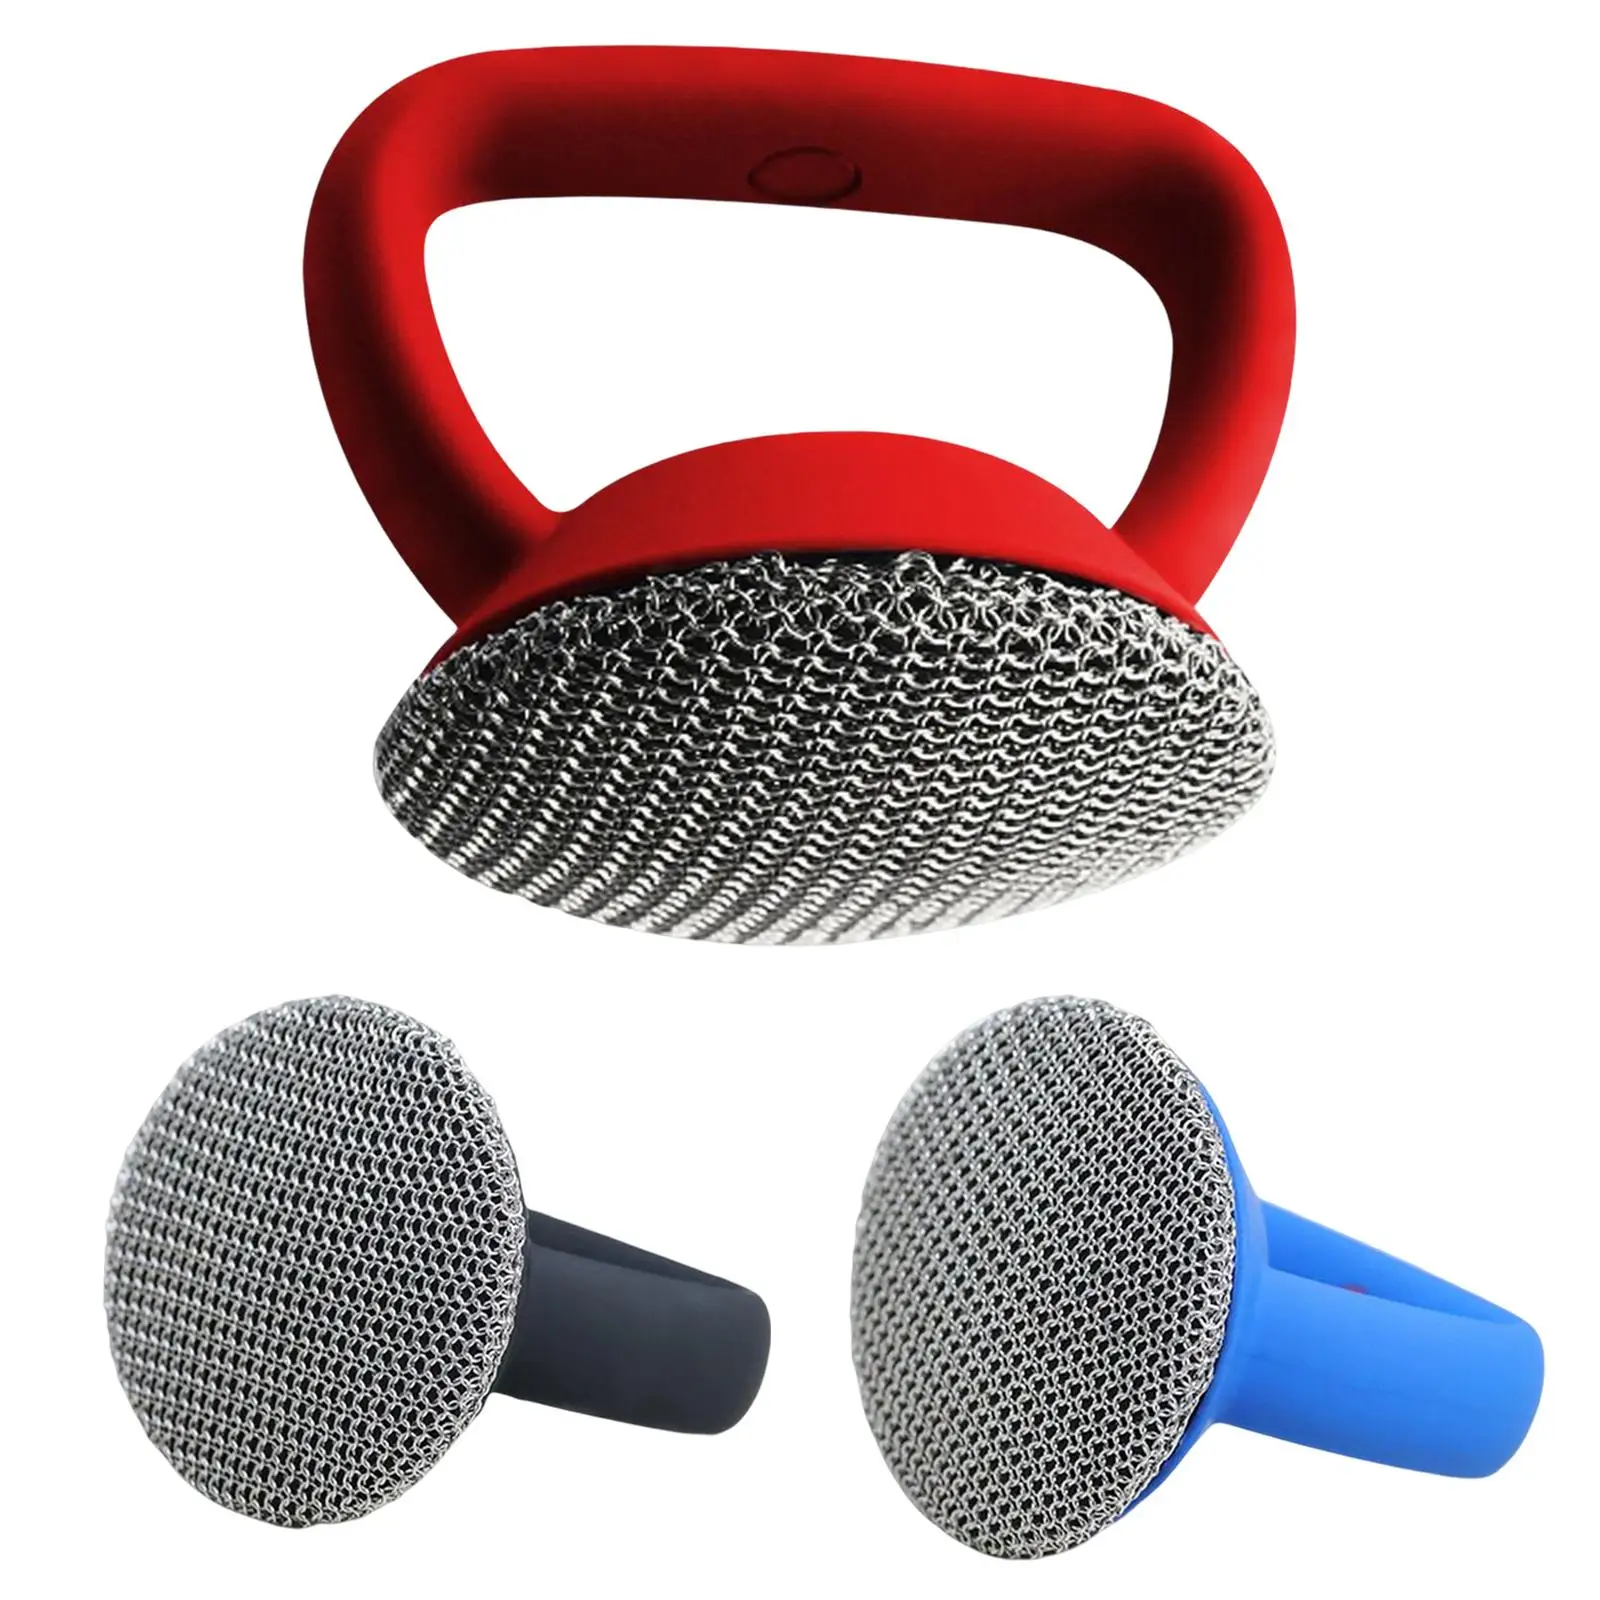 Stainless Steel Cleaning Brush with Handle for Dishes Metal Cookware Brush